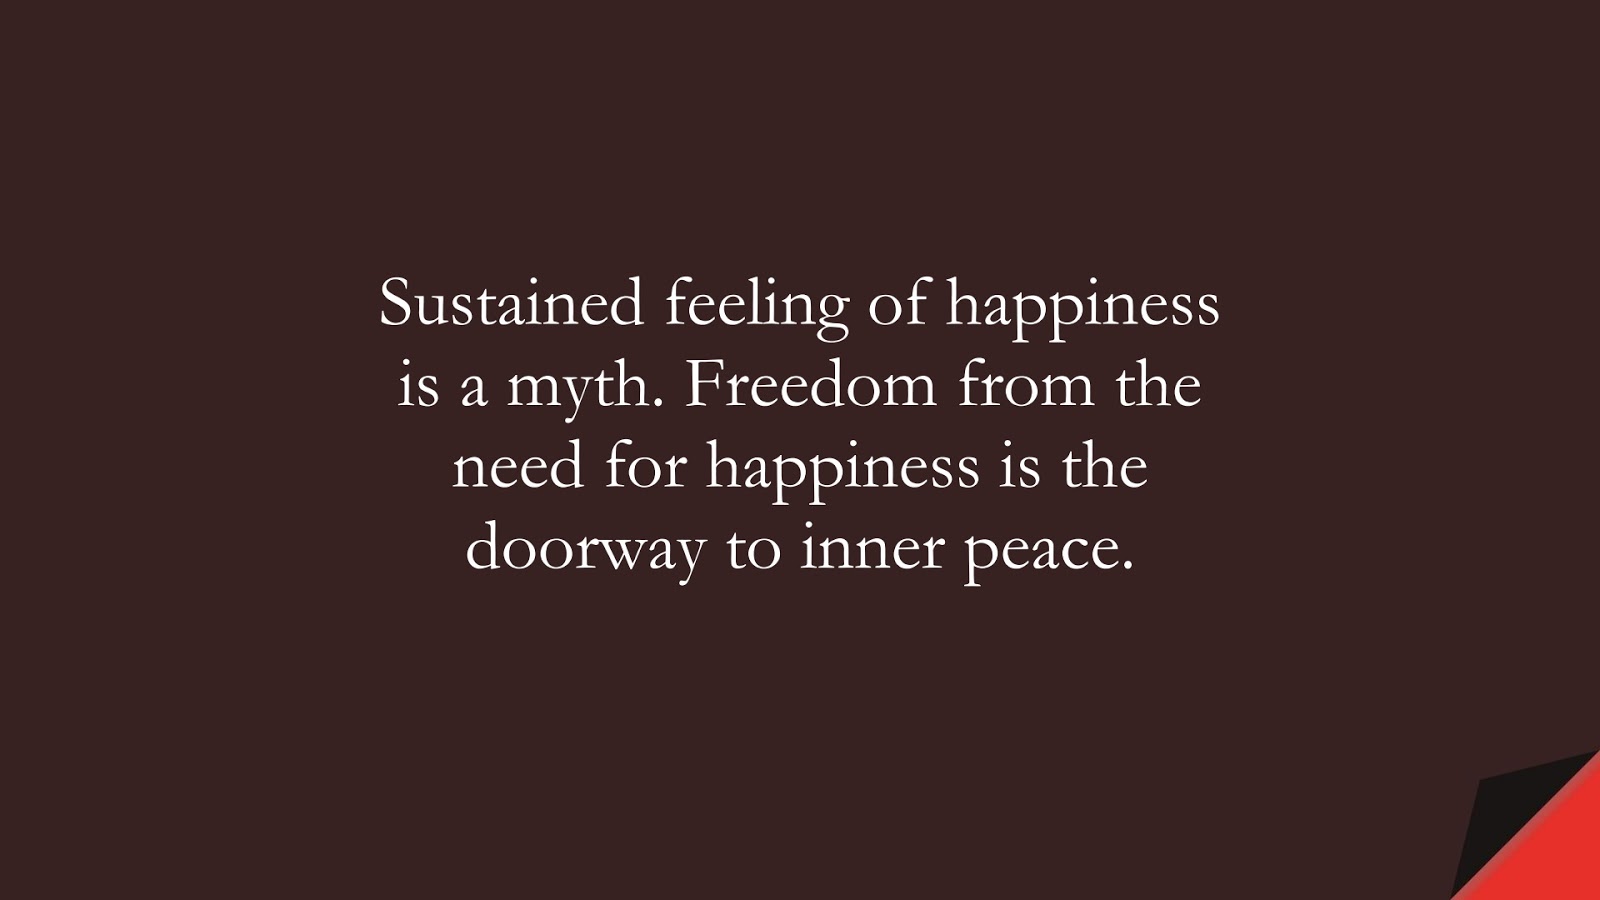 Sustained feeling of happiness is a myth. Freedom from the need for happiness is the doorway to inner peace.FALSE